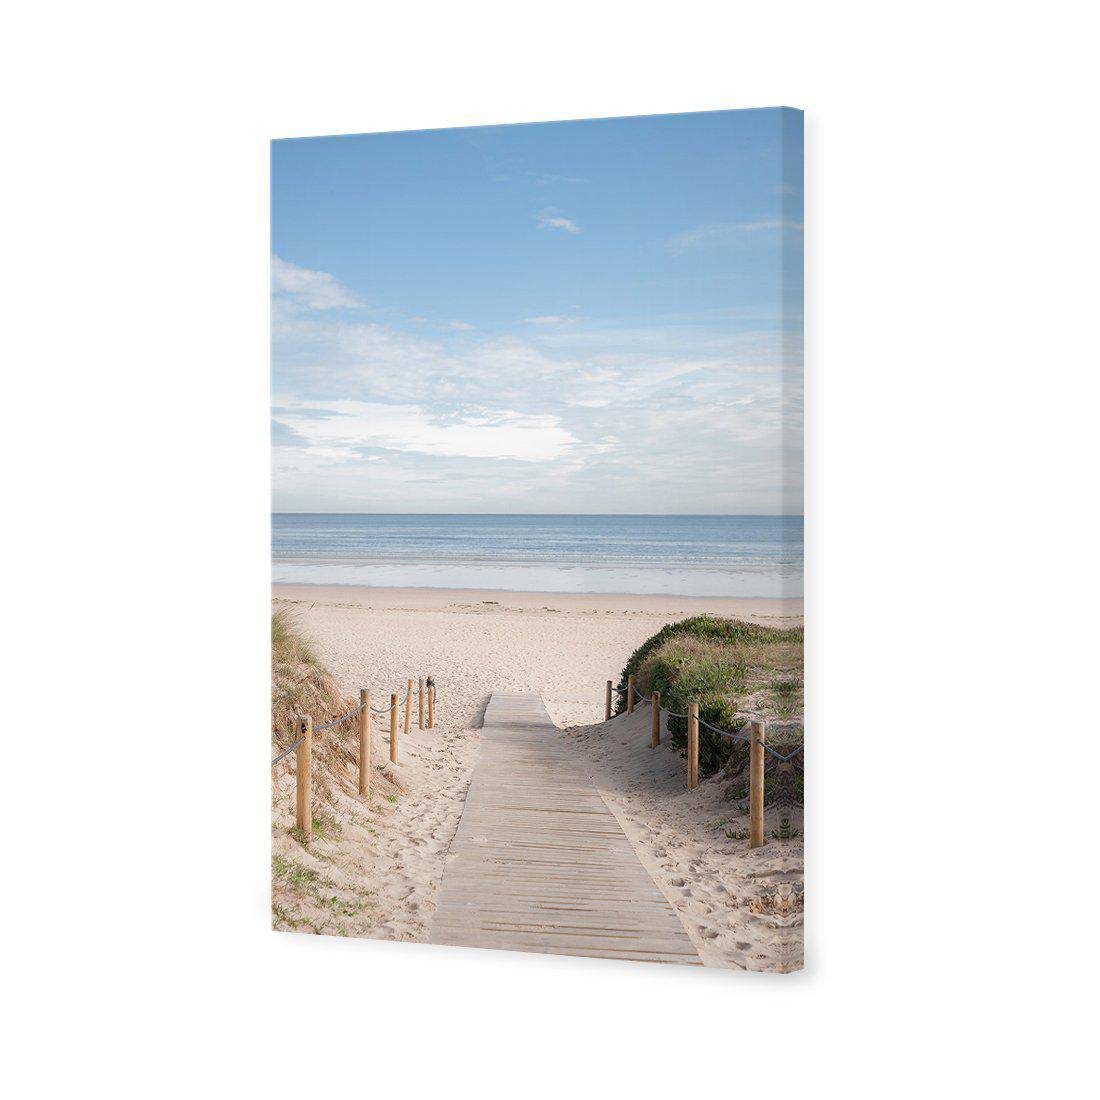 Pathway To The Sea Canvas Art-Canvas-Wall Art Designs-45x30cm-Canvas - No Frame-Wall Art Designs